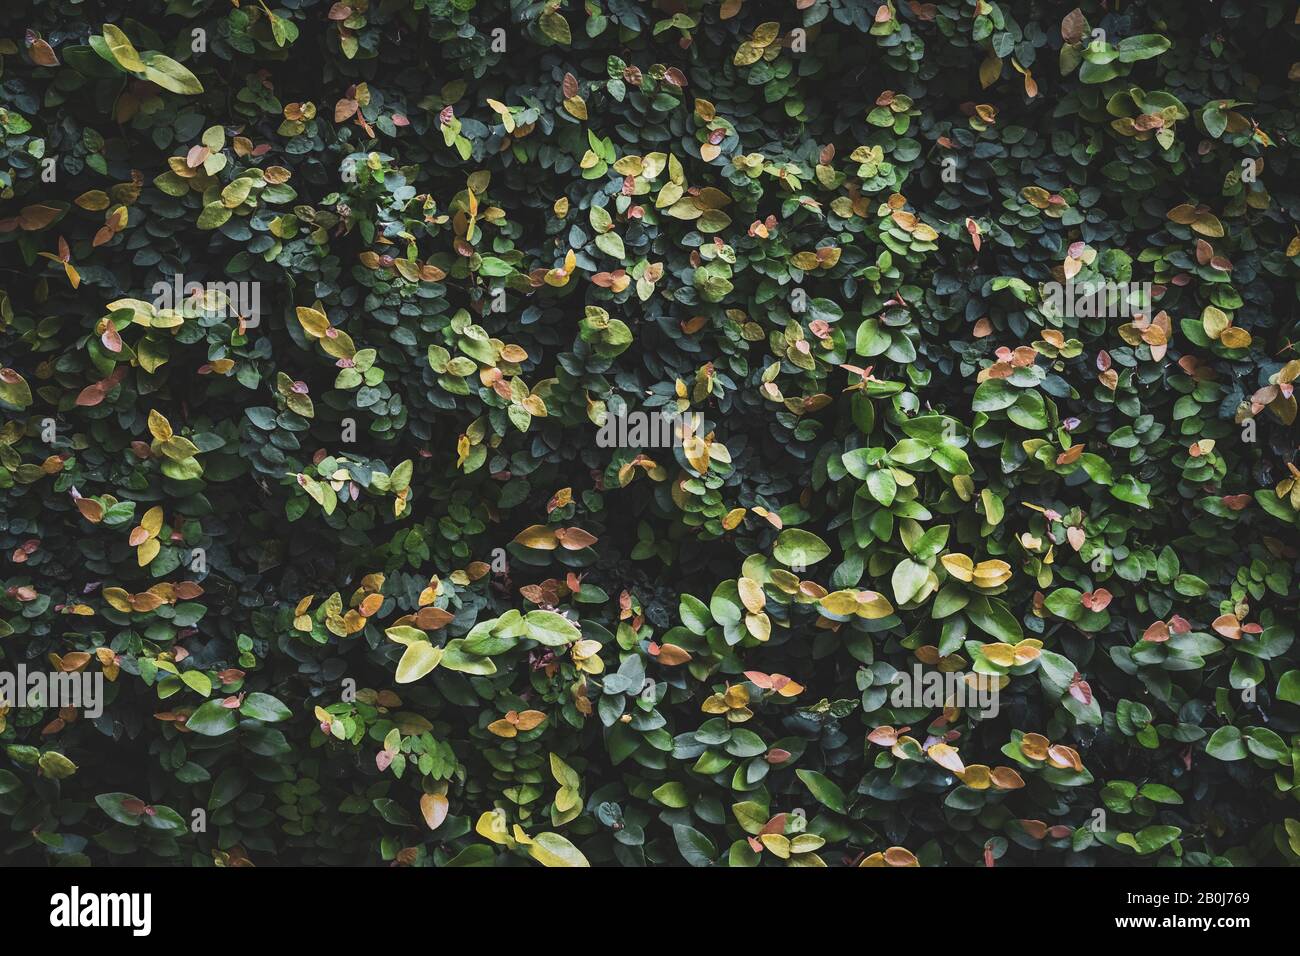 Leaves of different colors of a garden hedge Stock Photo